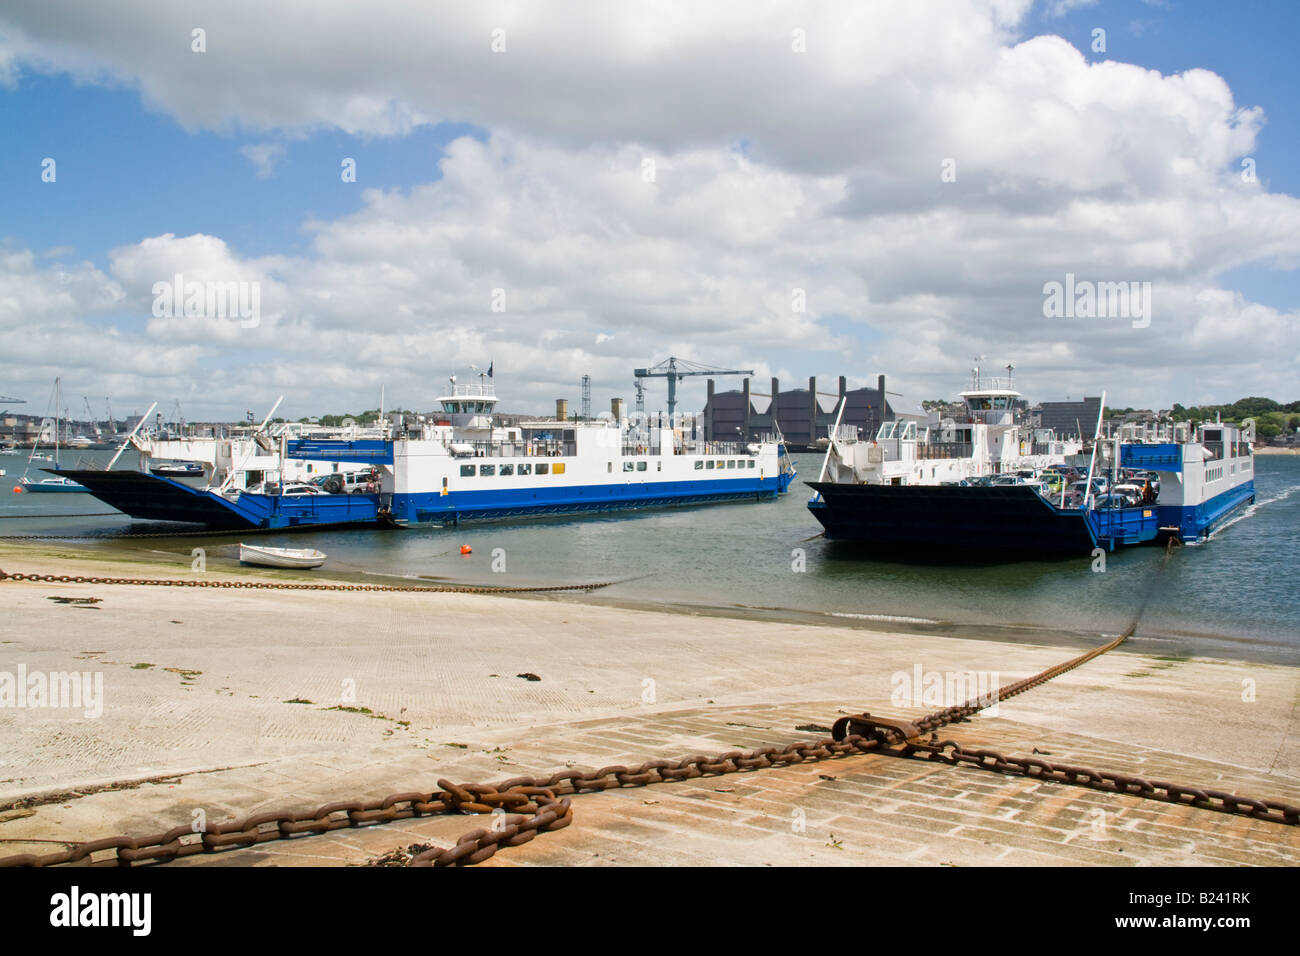 The two car ferries at Torpoint Cornwall England UK Stock Photo